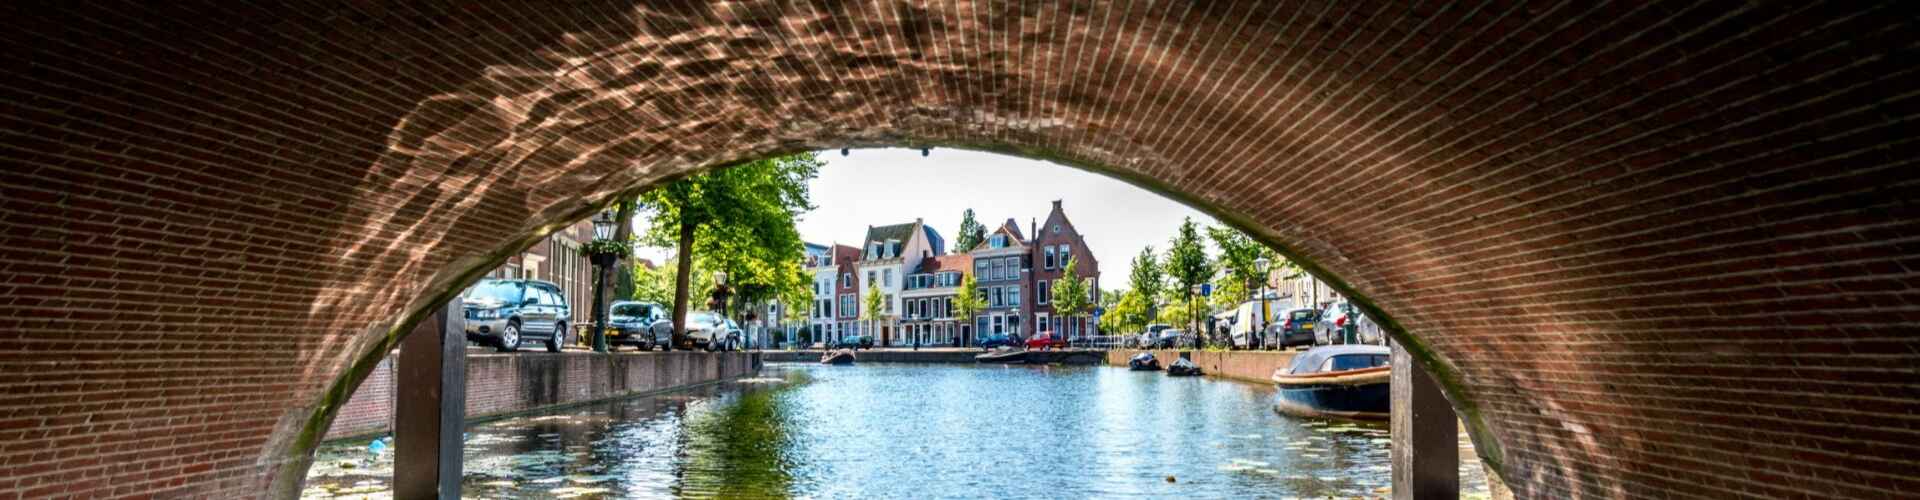 A view out from underneath a bridge on a Dutch canal